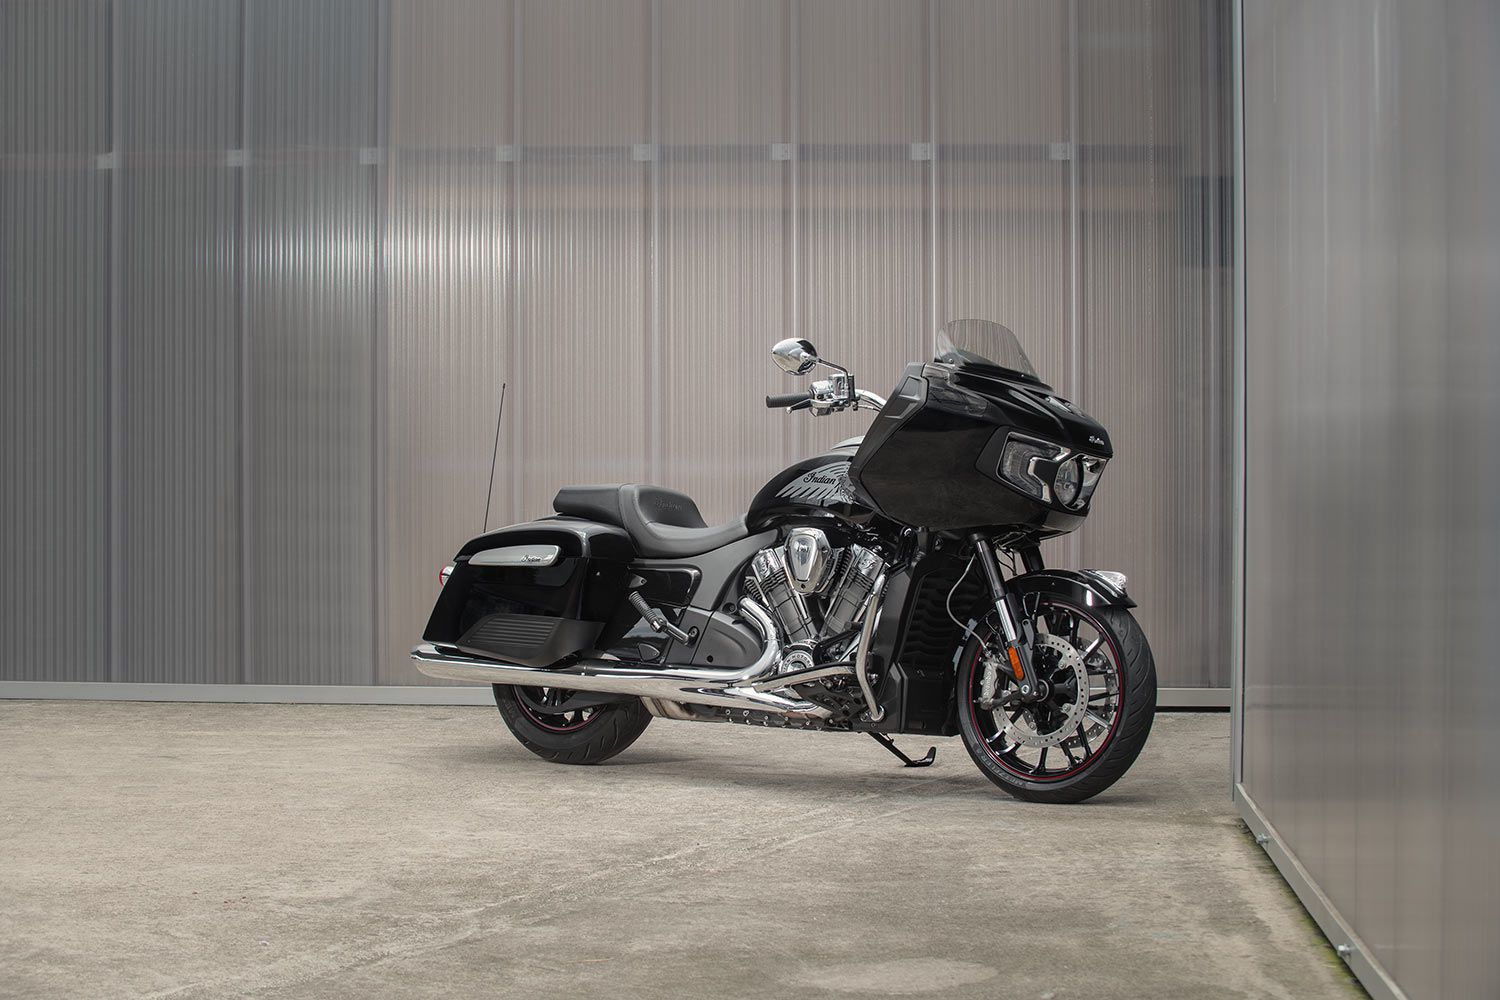 The 2022 Indian Motorcycle Challenger Limited will price at $27,999.